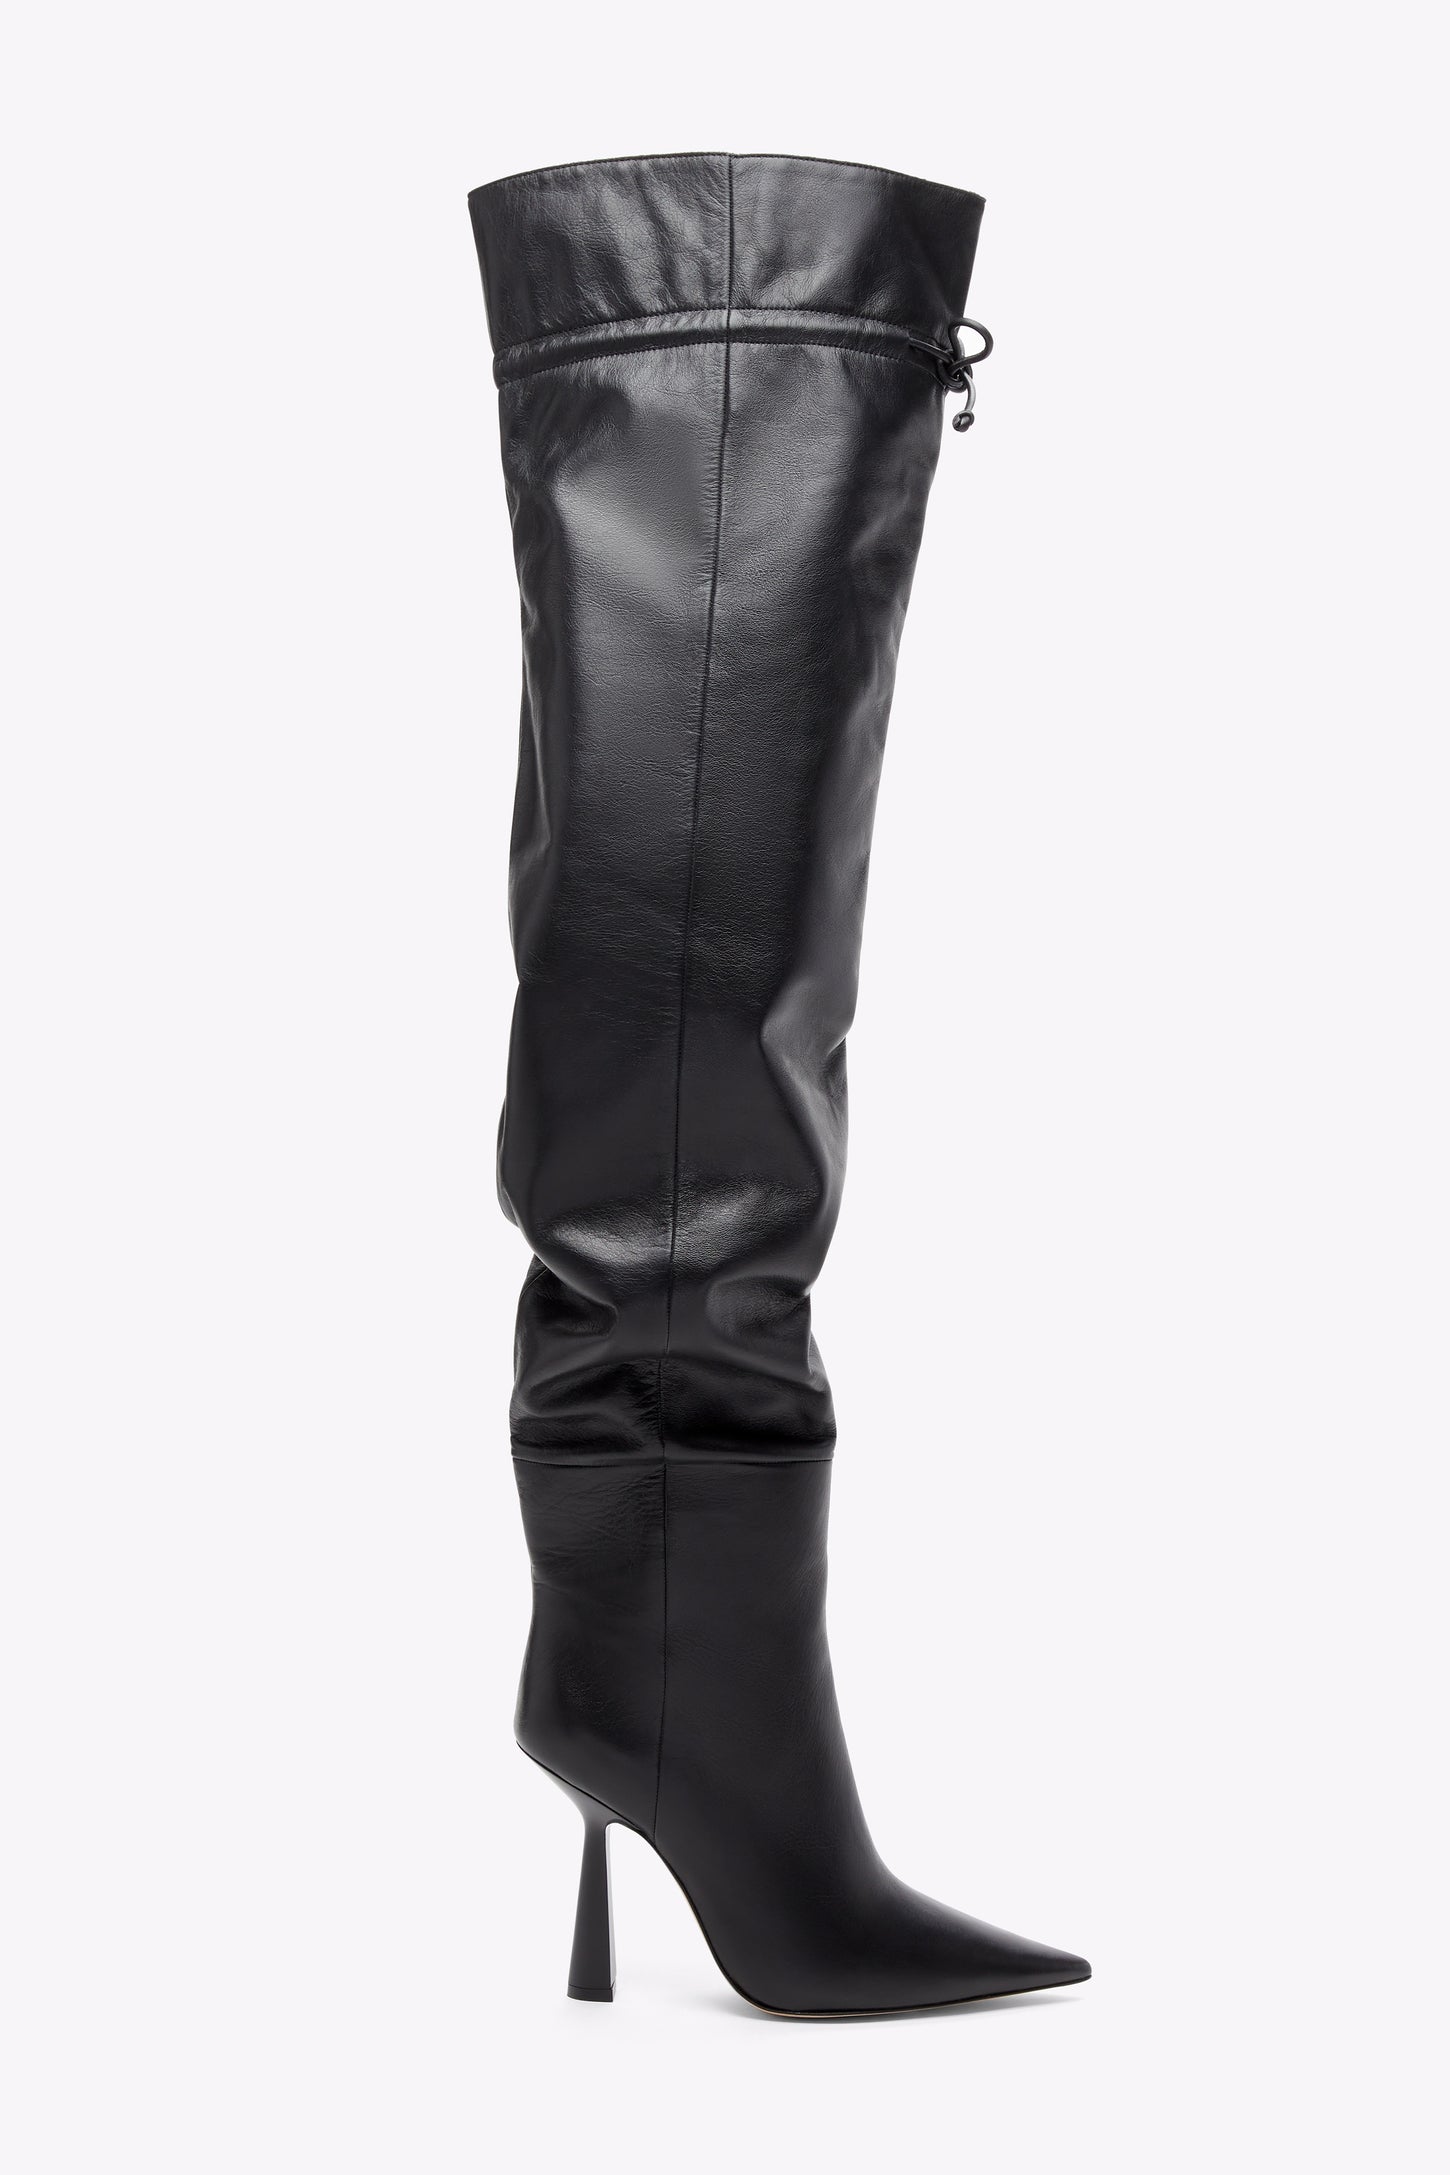 OVER THE KNEE BOOT | BLACK001 - GOOD AMERICAN